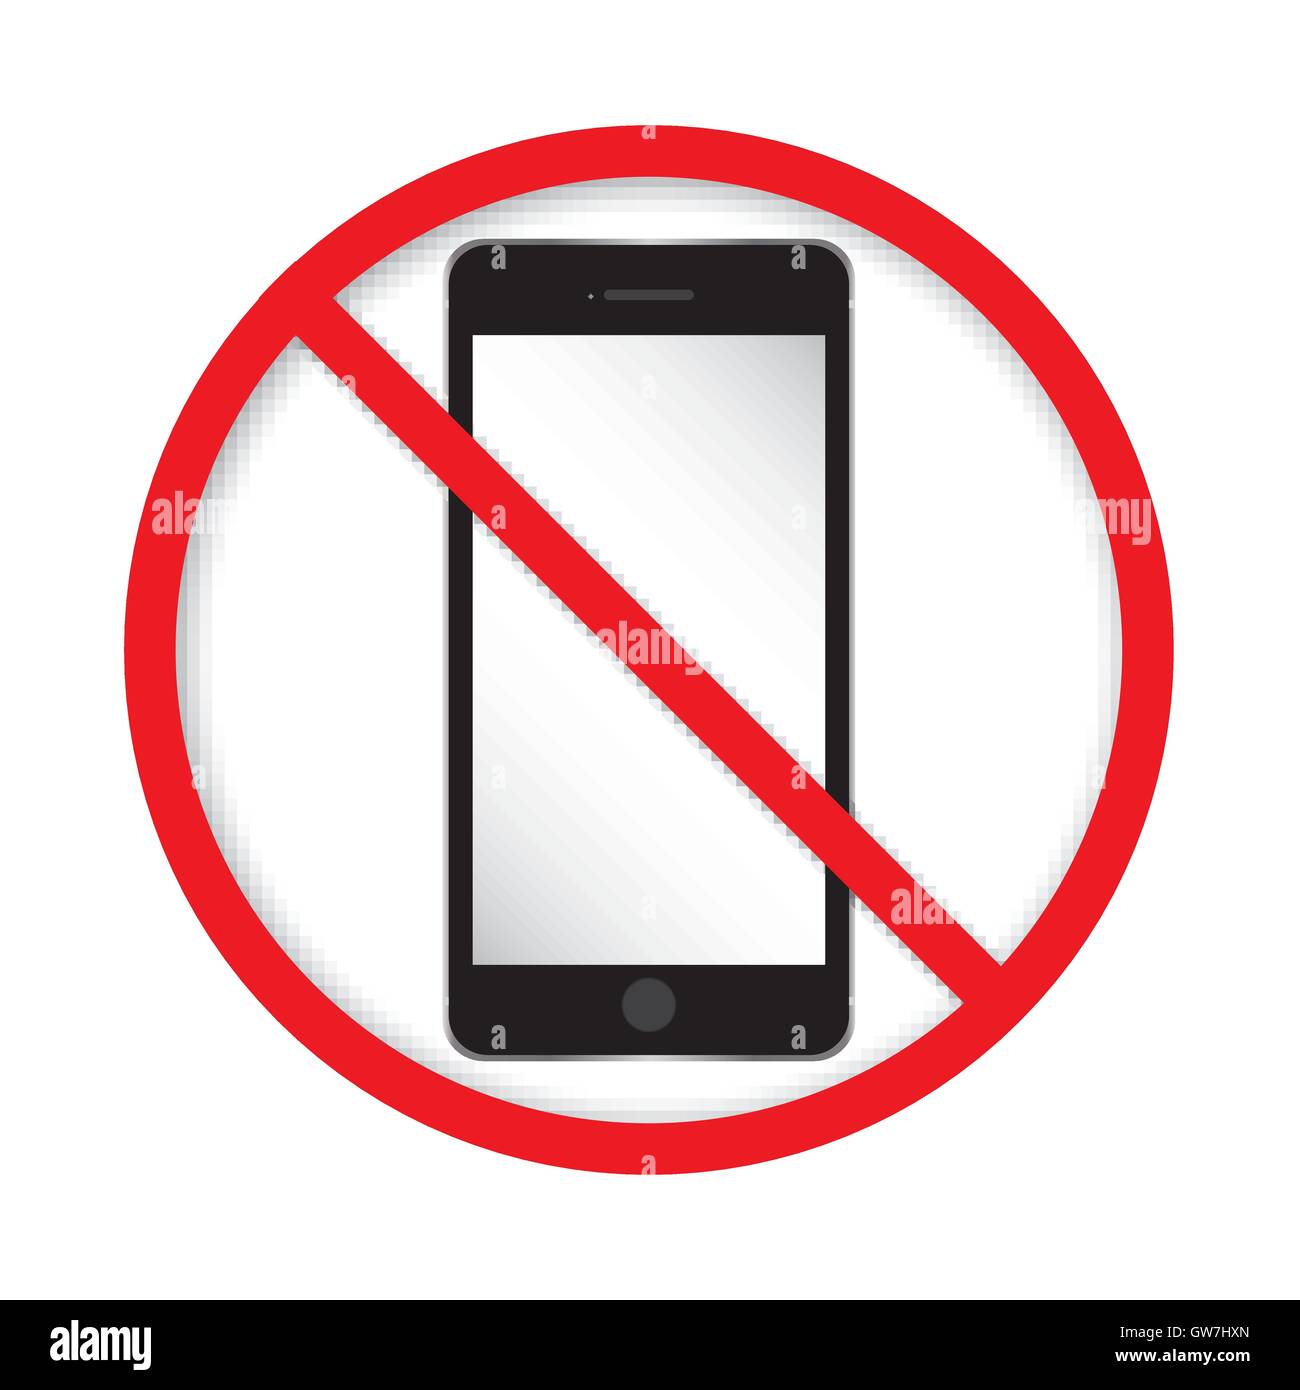 no, cell, phone, sign, icon, white, call, mobile, illustration, red, stop, caution, symbol, vector, forbidden, communication Stock Vector